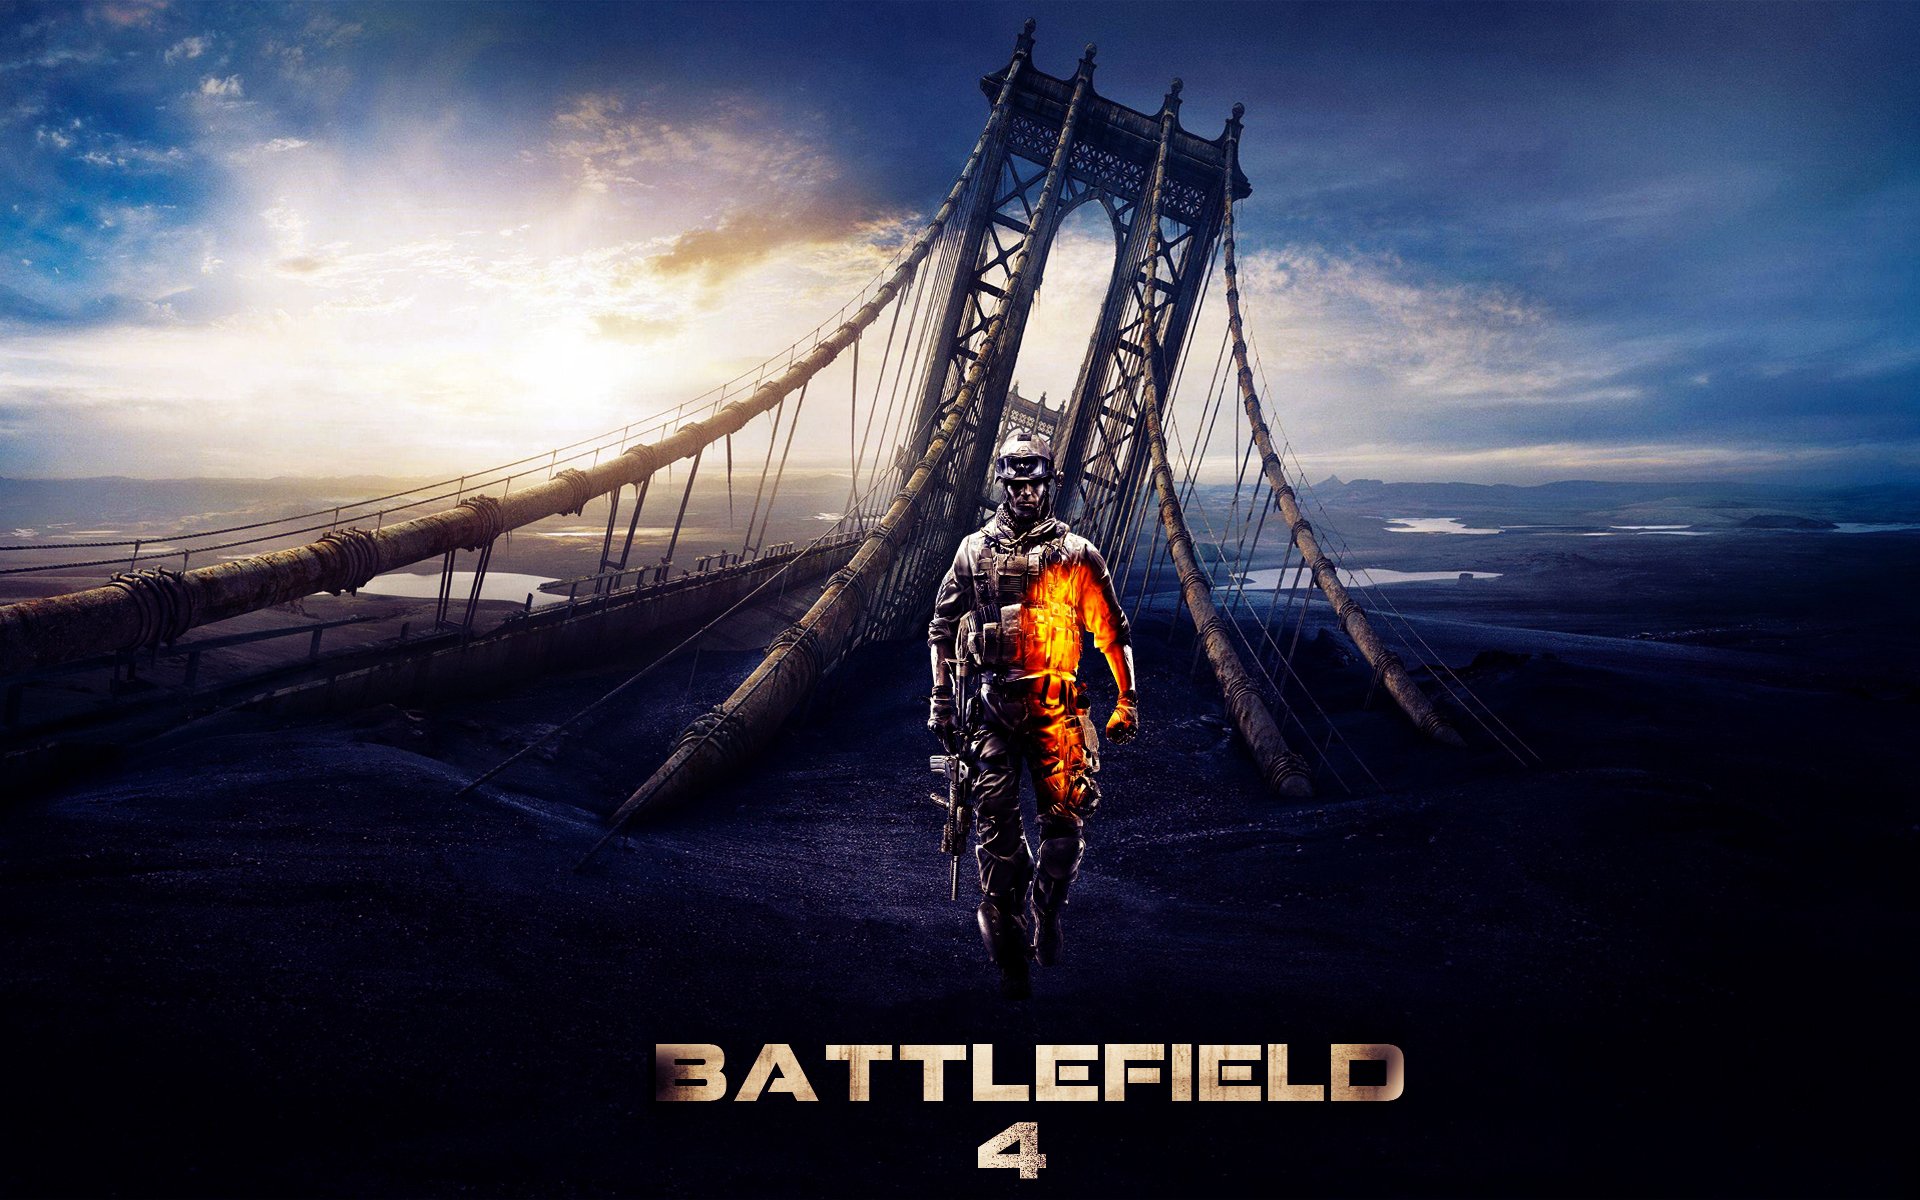  30 2015 By Stephen Comments Off on Battlefield 4 HD Wallpapers